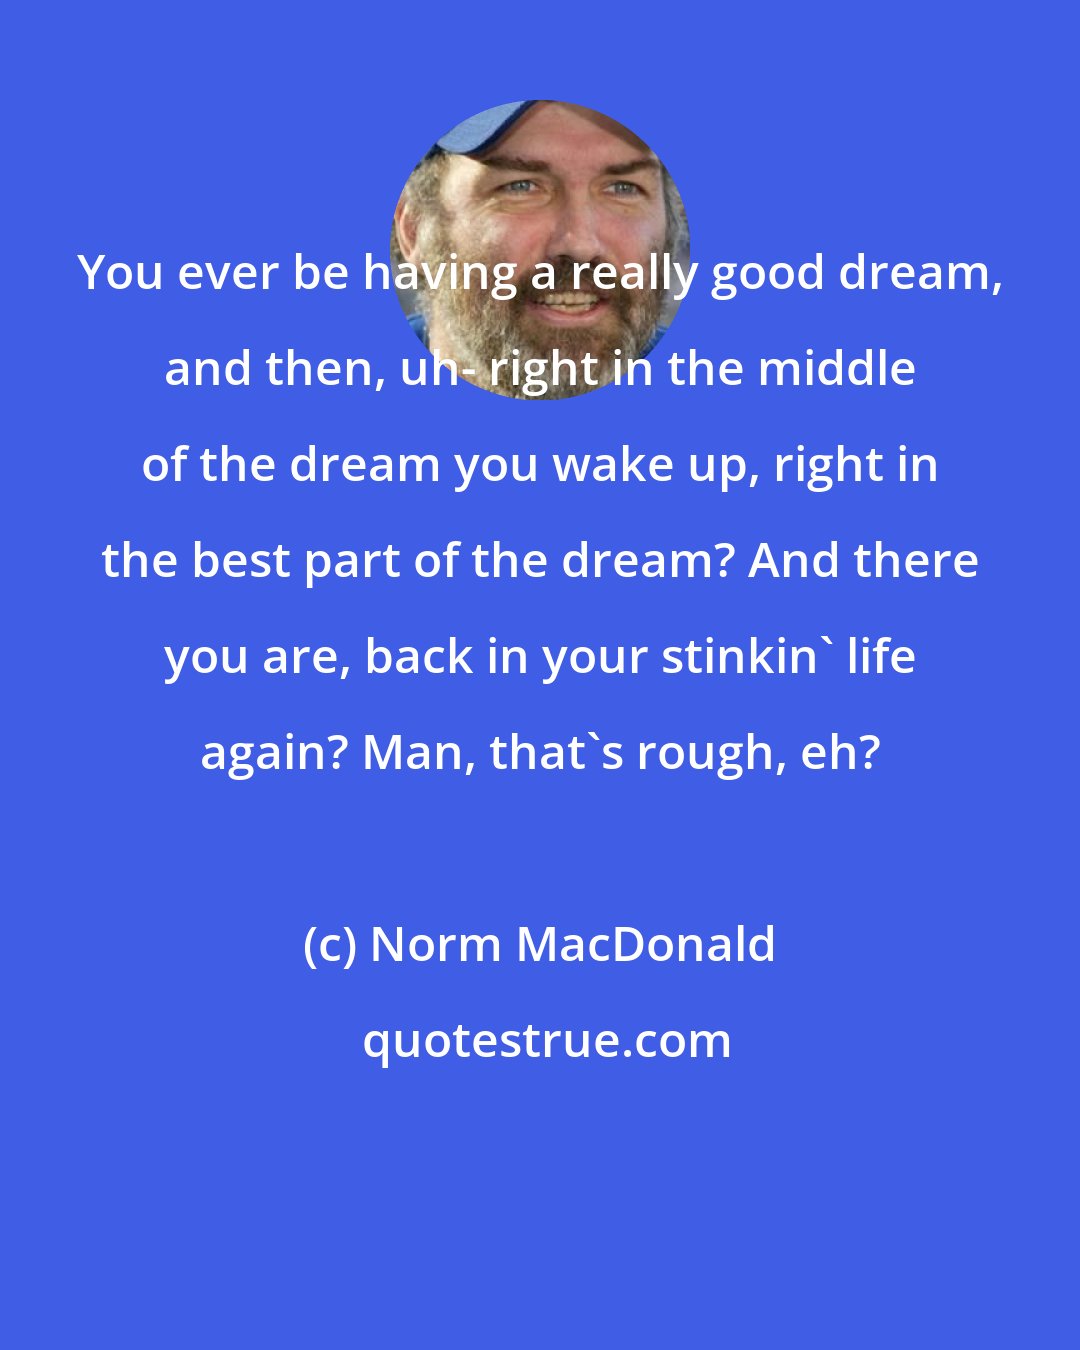 Norm MacDonald: You ever be having a really good dream, and then, uh- right in the middle of the dream you wake up, right in the best part of the dream? And there you are, back in your stinkin' life again? Man, that's rough, eh?